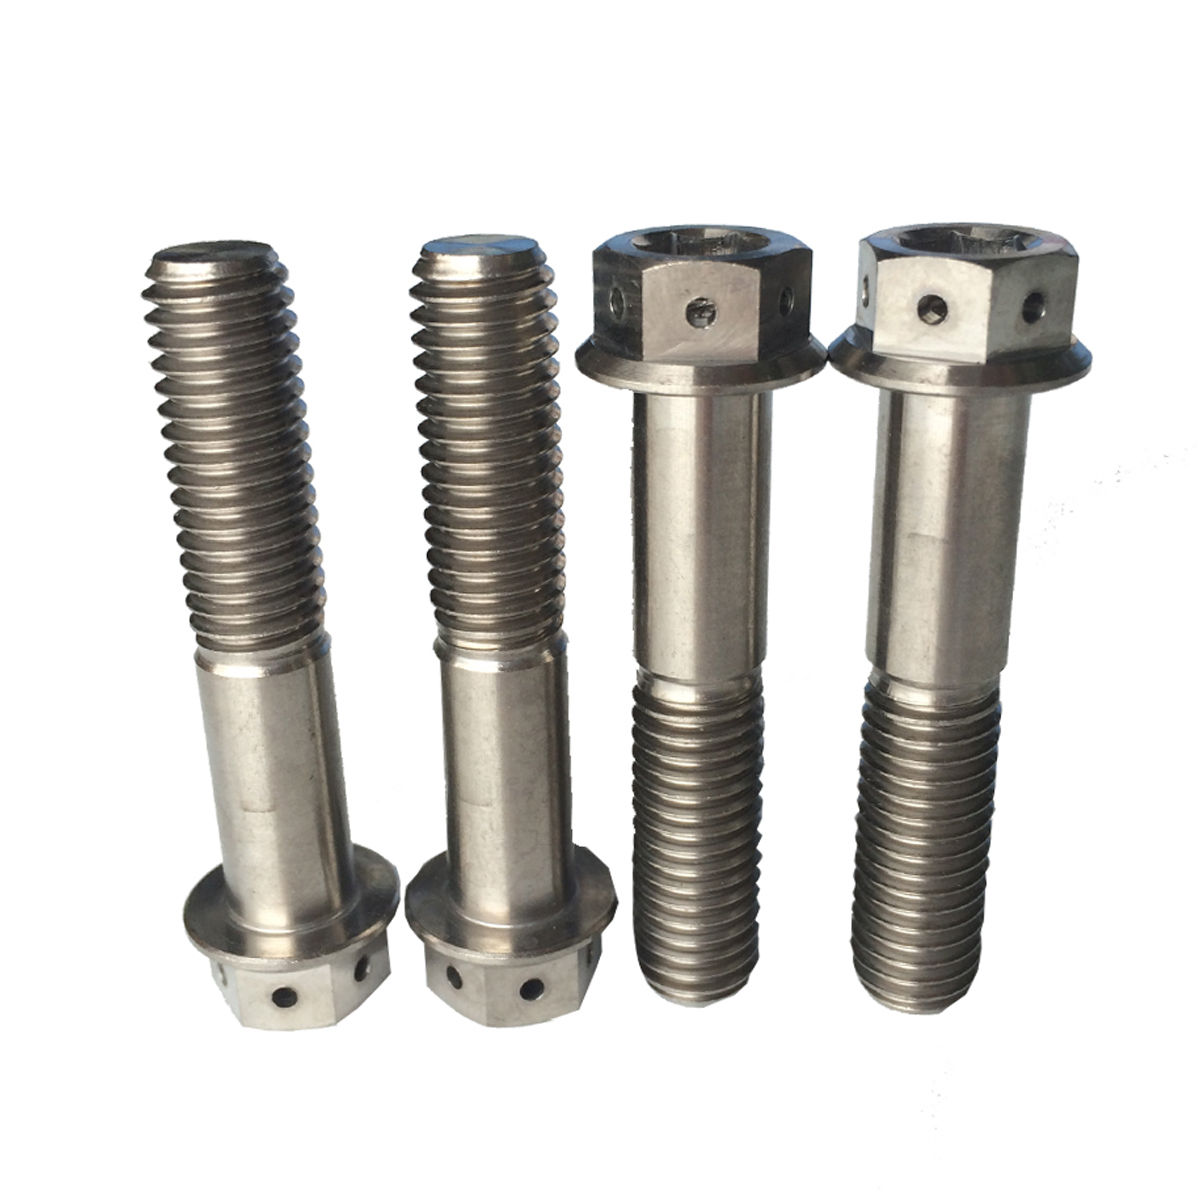 Hexagon flange titanium bolts for bicycle,Flange Bolts